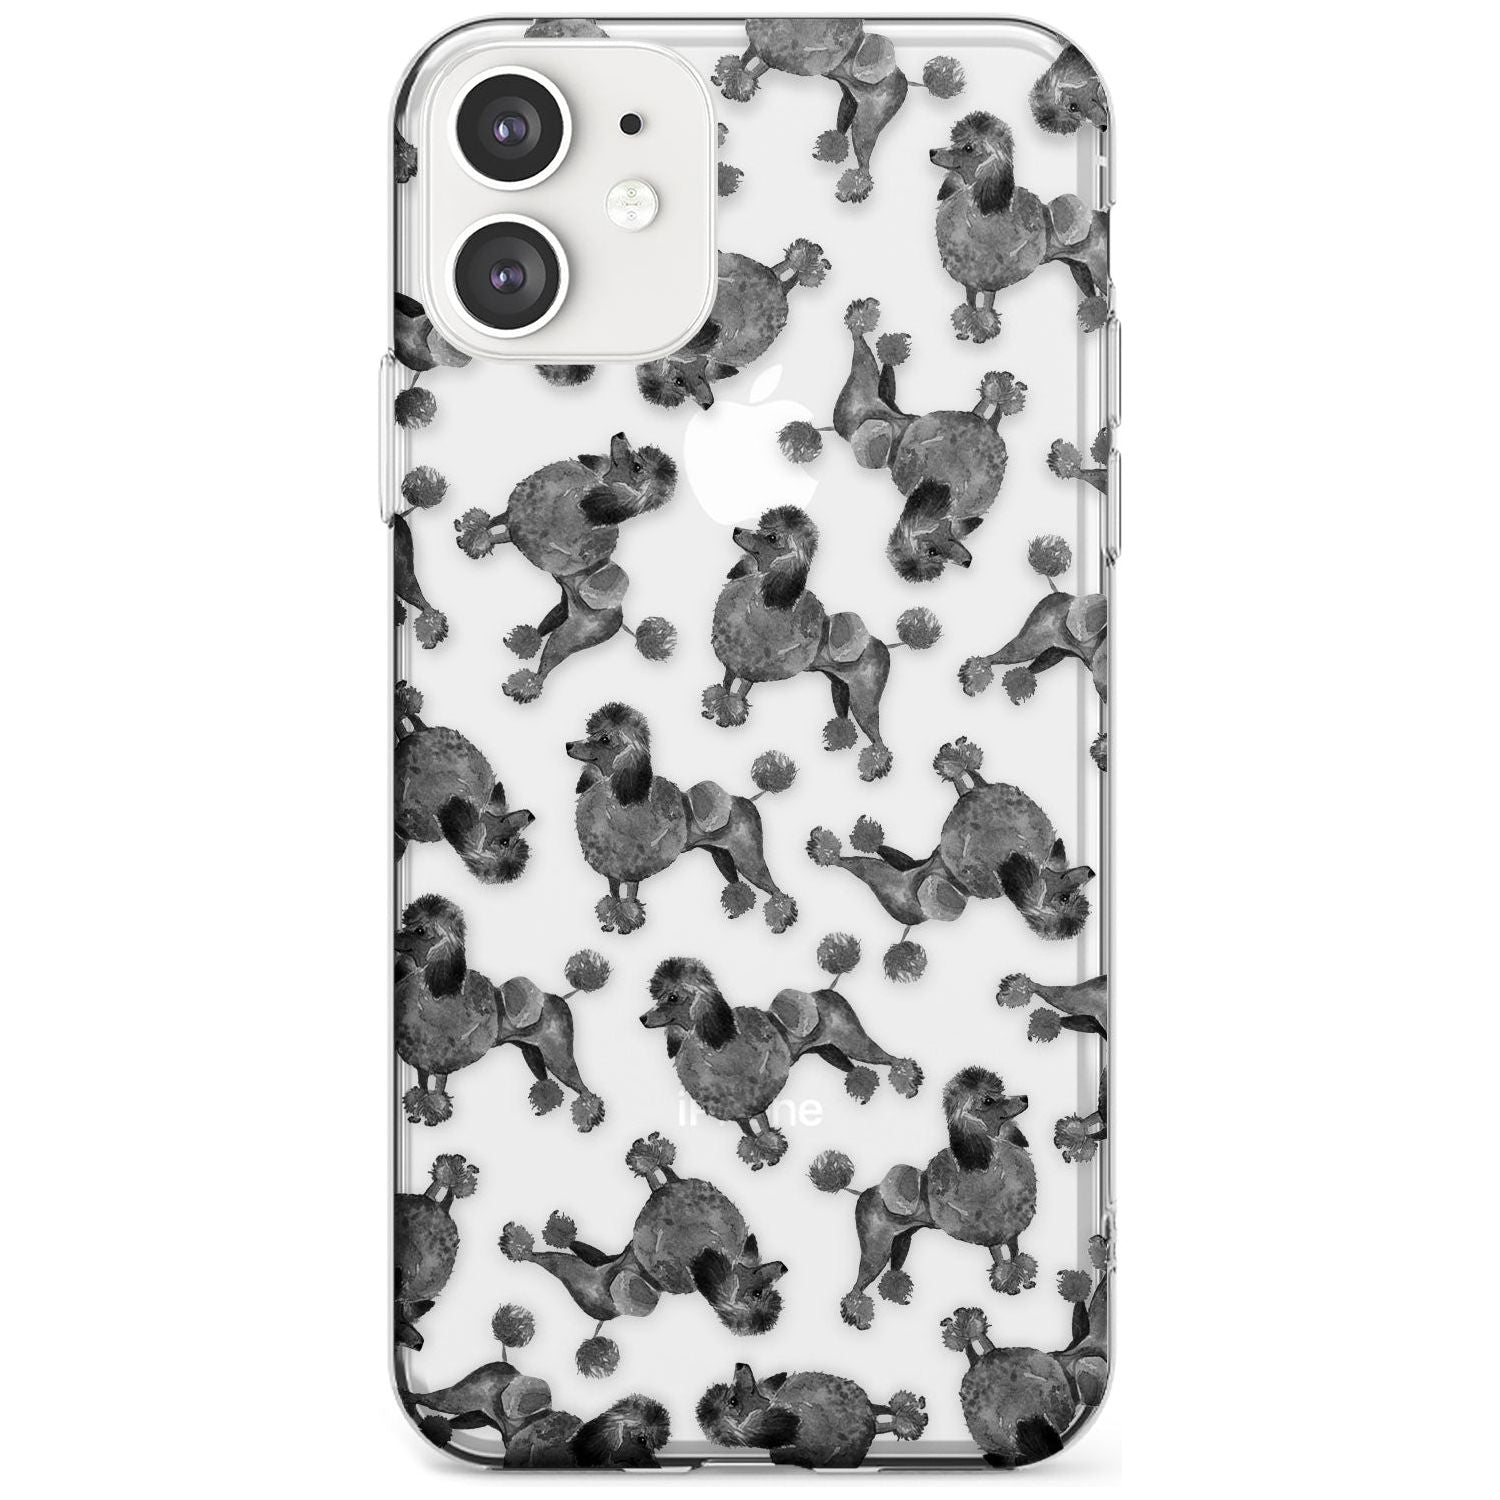 Poodle (Black) Watercolour Dog Pattern Slim TPU Phone Case for iPhone 11